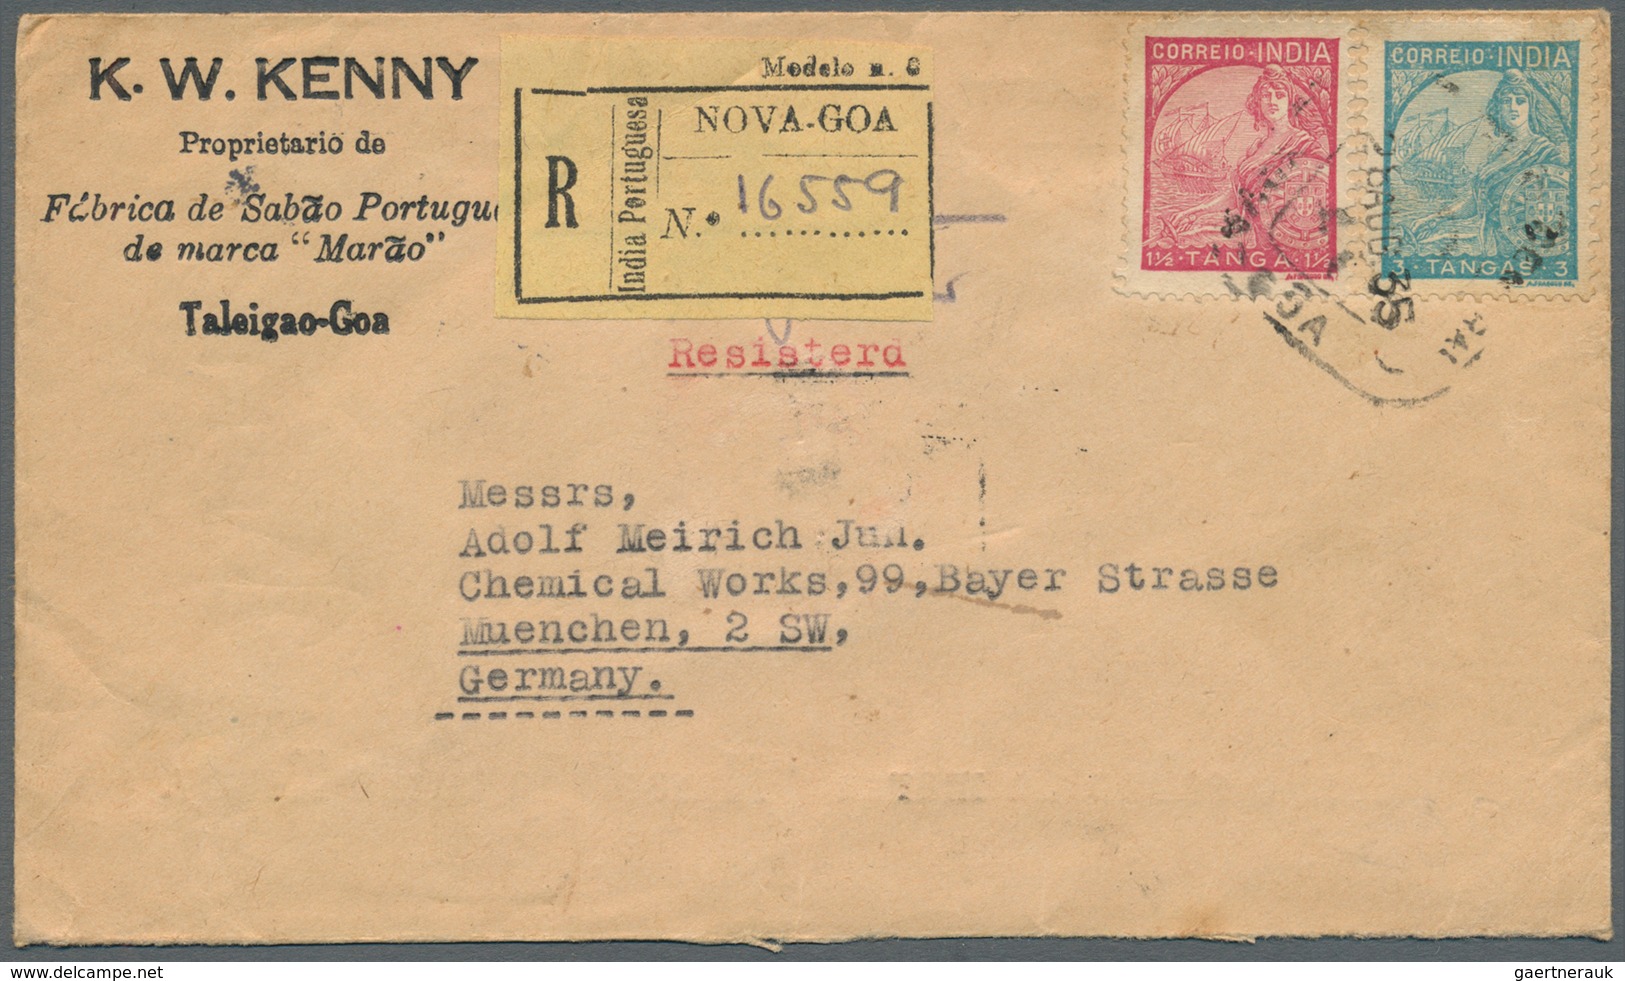 Portugiesisch-Indien: 1935-1937, Two Registered Covers From Nova Goa To Munich, Germany As 1) 1935 P - Portugiesisch-Indien